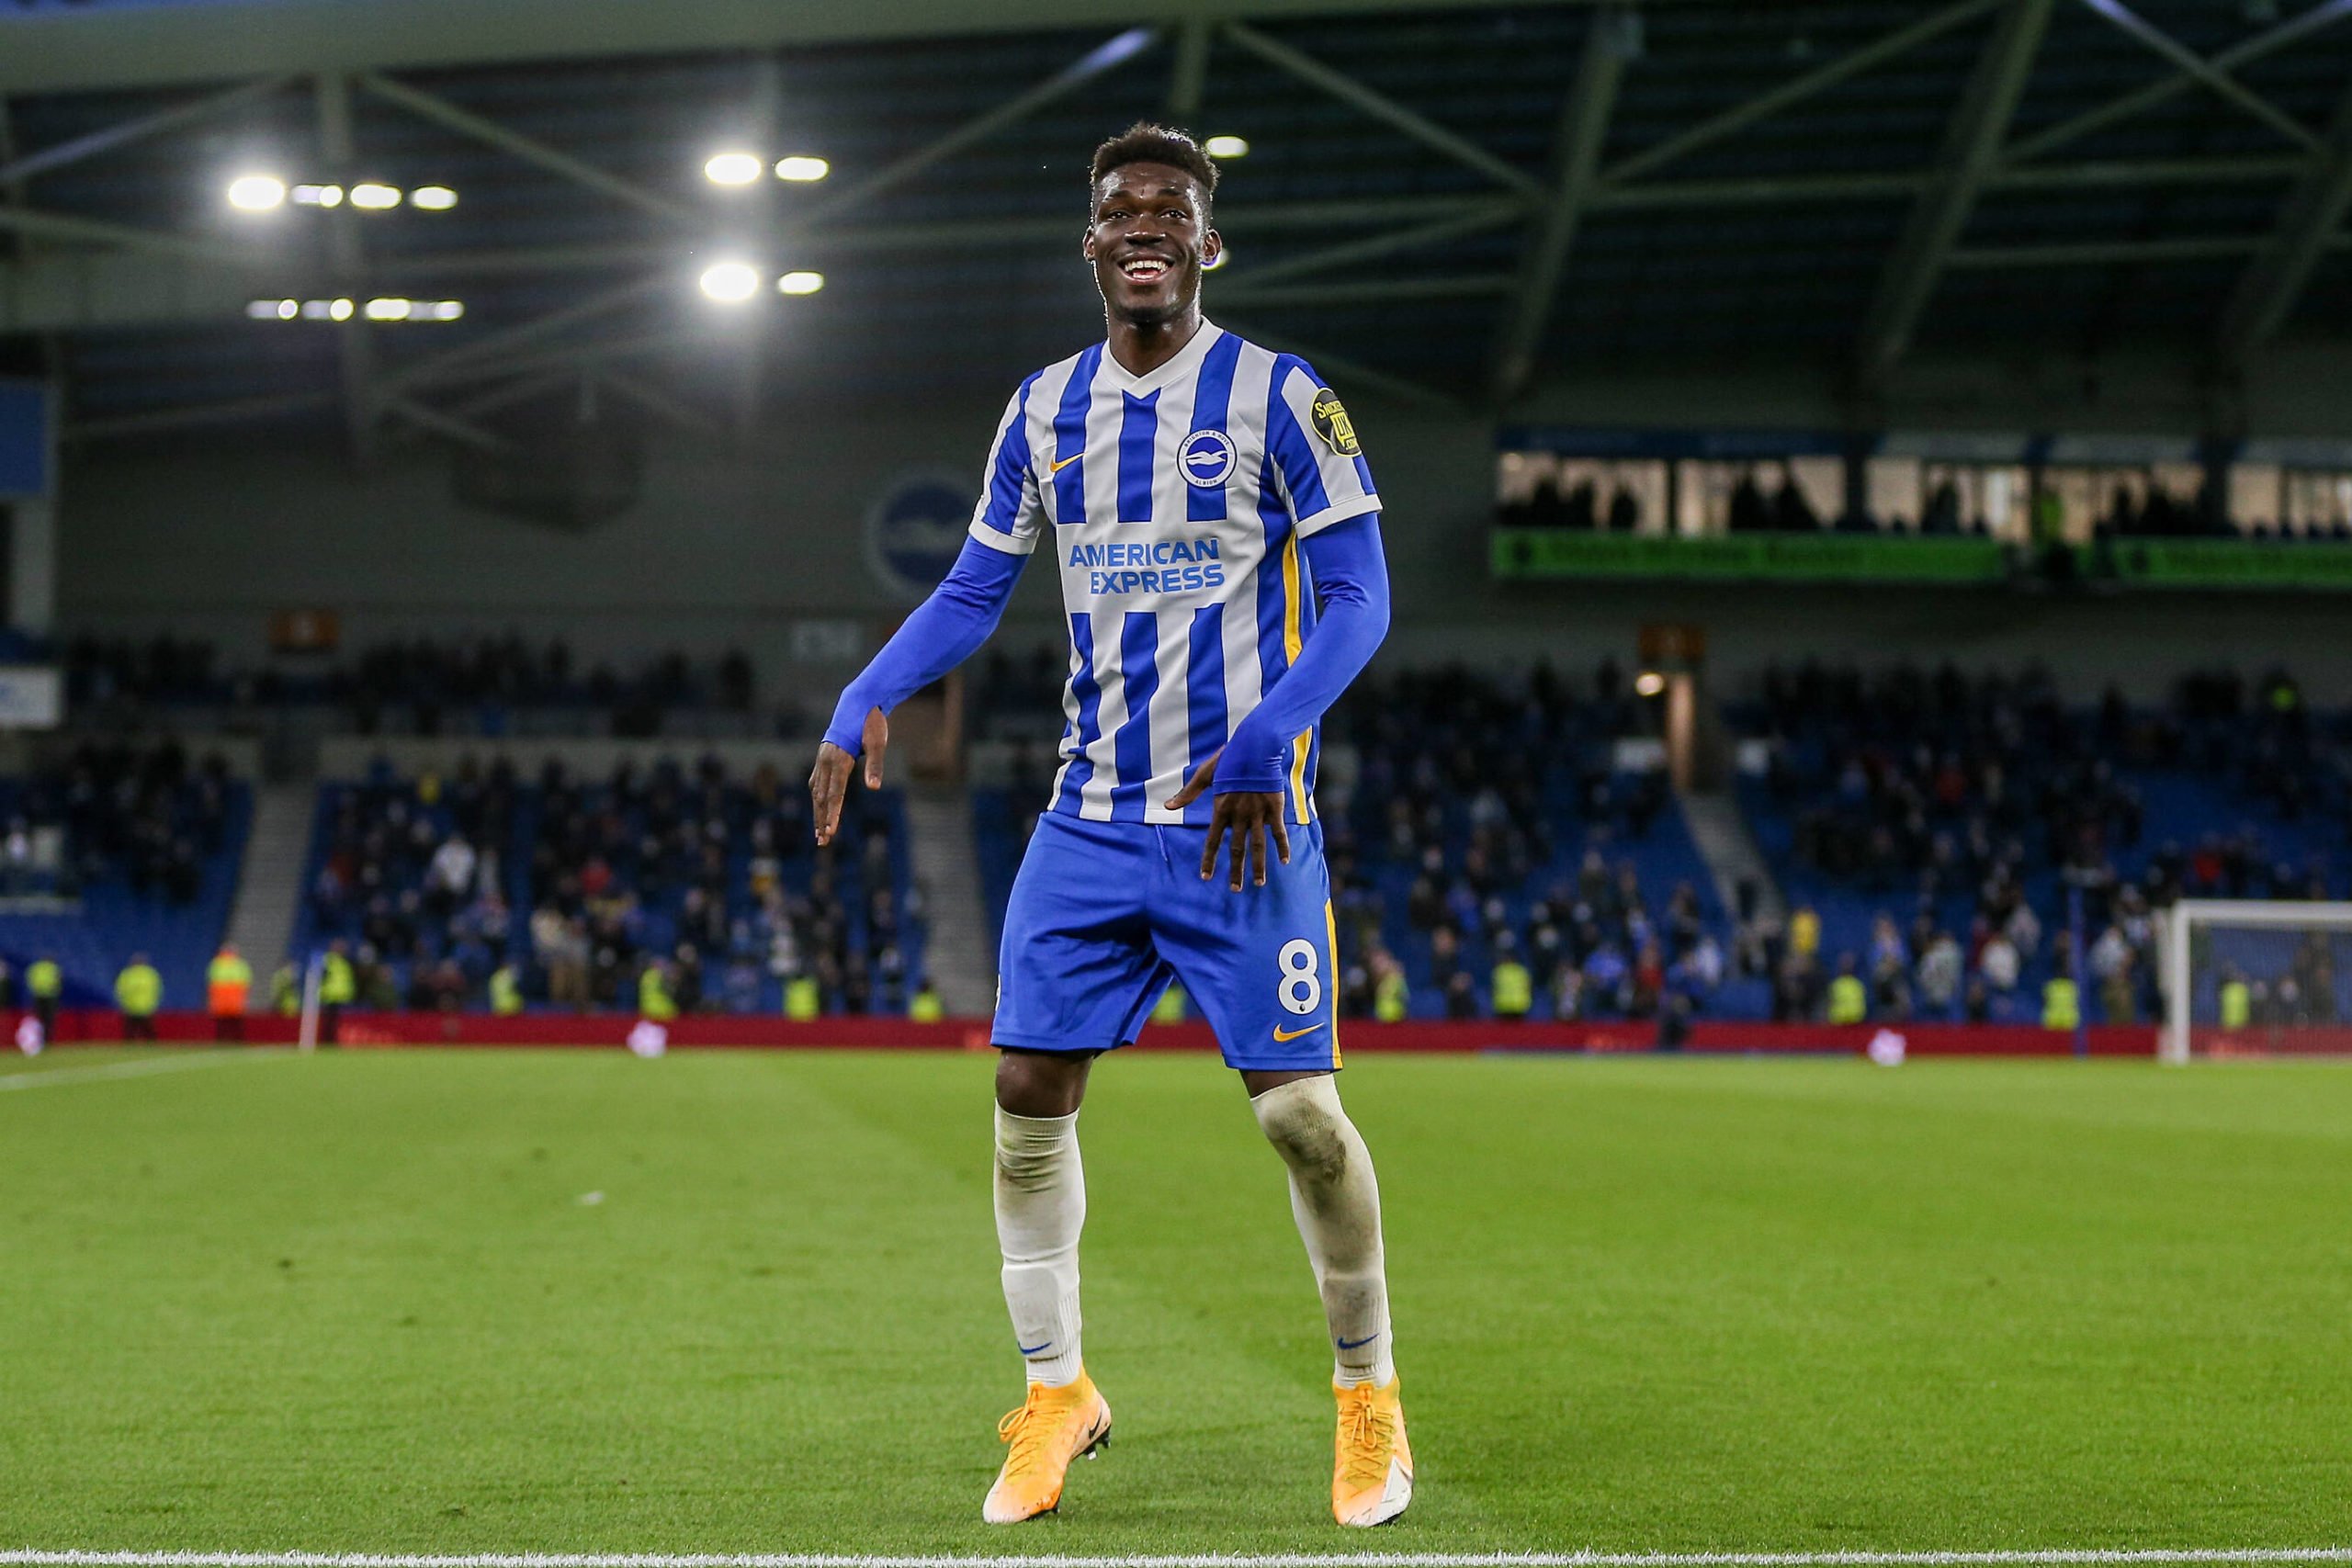 Liverpool are eyeing a January move for Bissouma who is seen in the photo